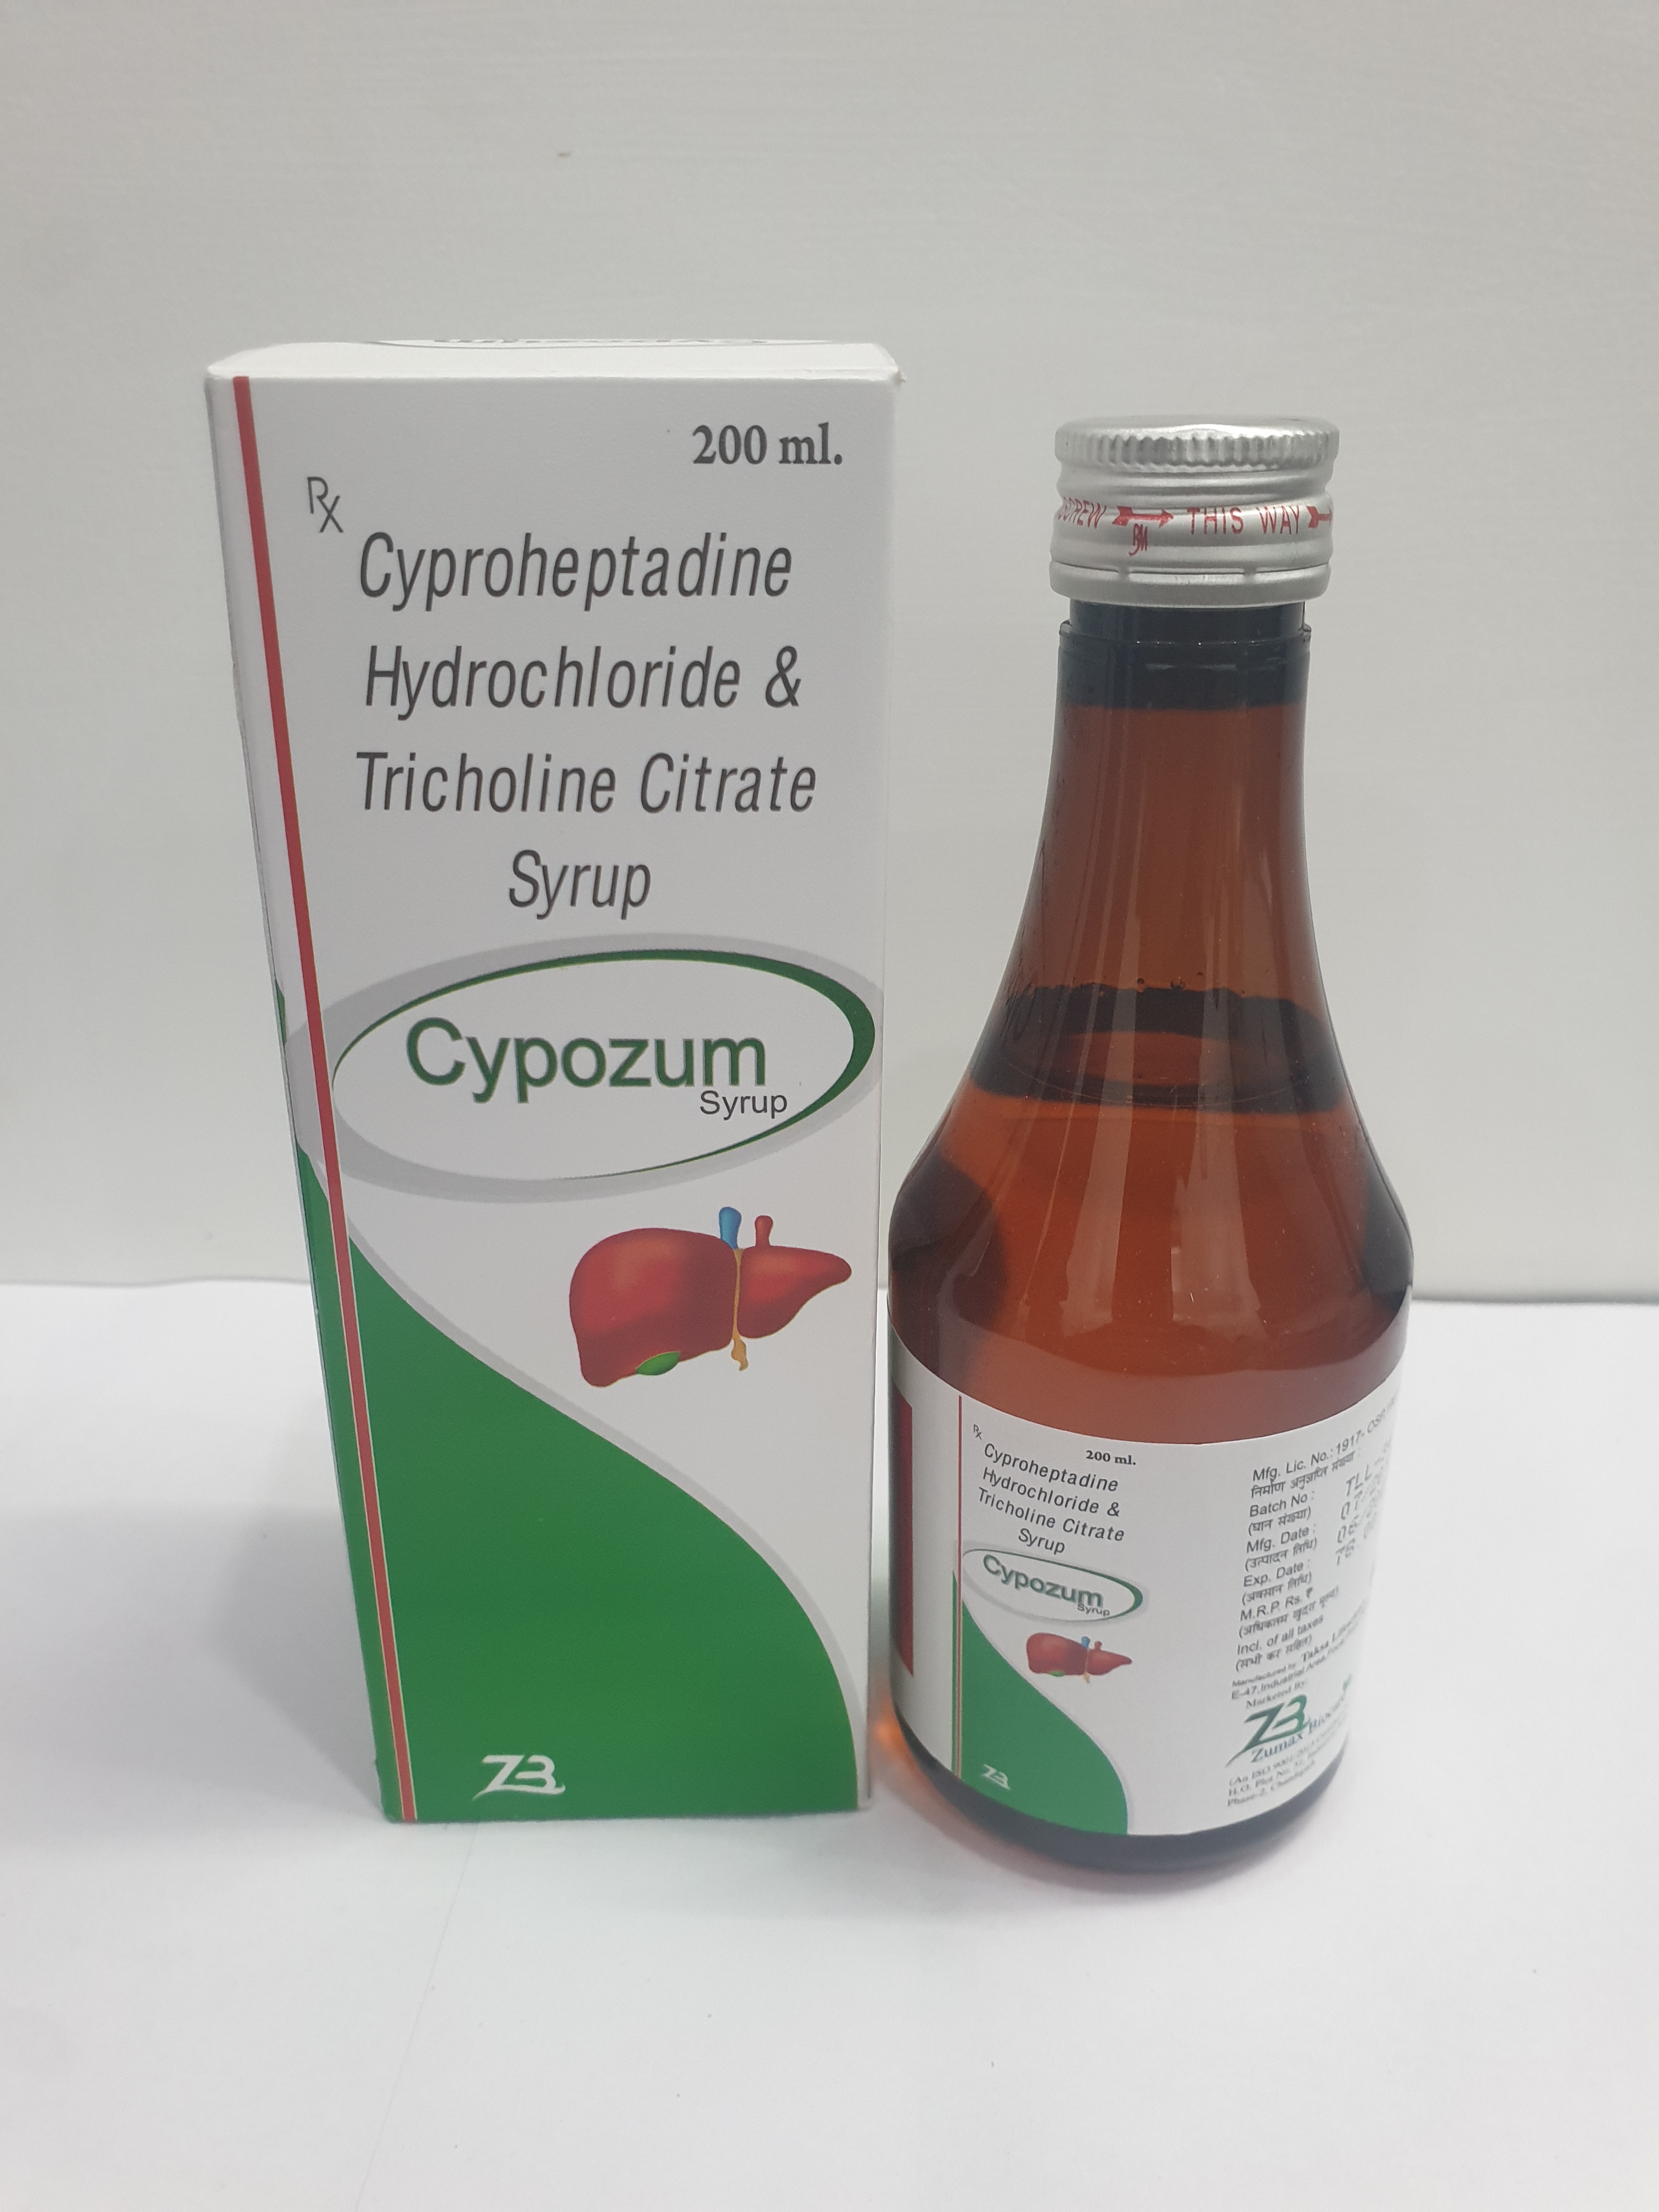 Product Name: Cypozum, Compositions of Cyproheptadine  Hydrochloride & Tricholine Citrate Syrup are Cyproheptadine  Hydrochloride & Tricholine Citrate Syrup - Zumax Biocare